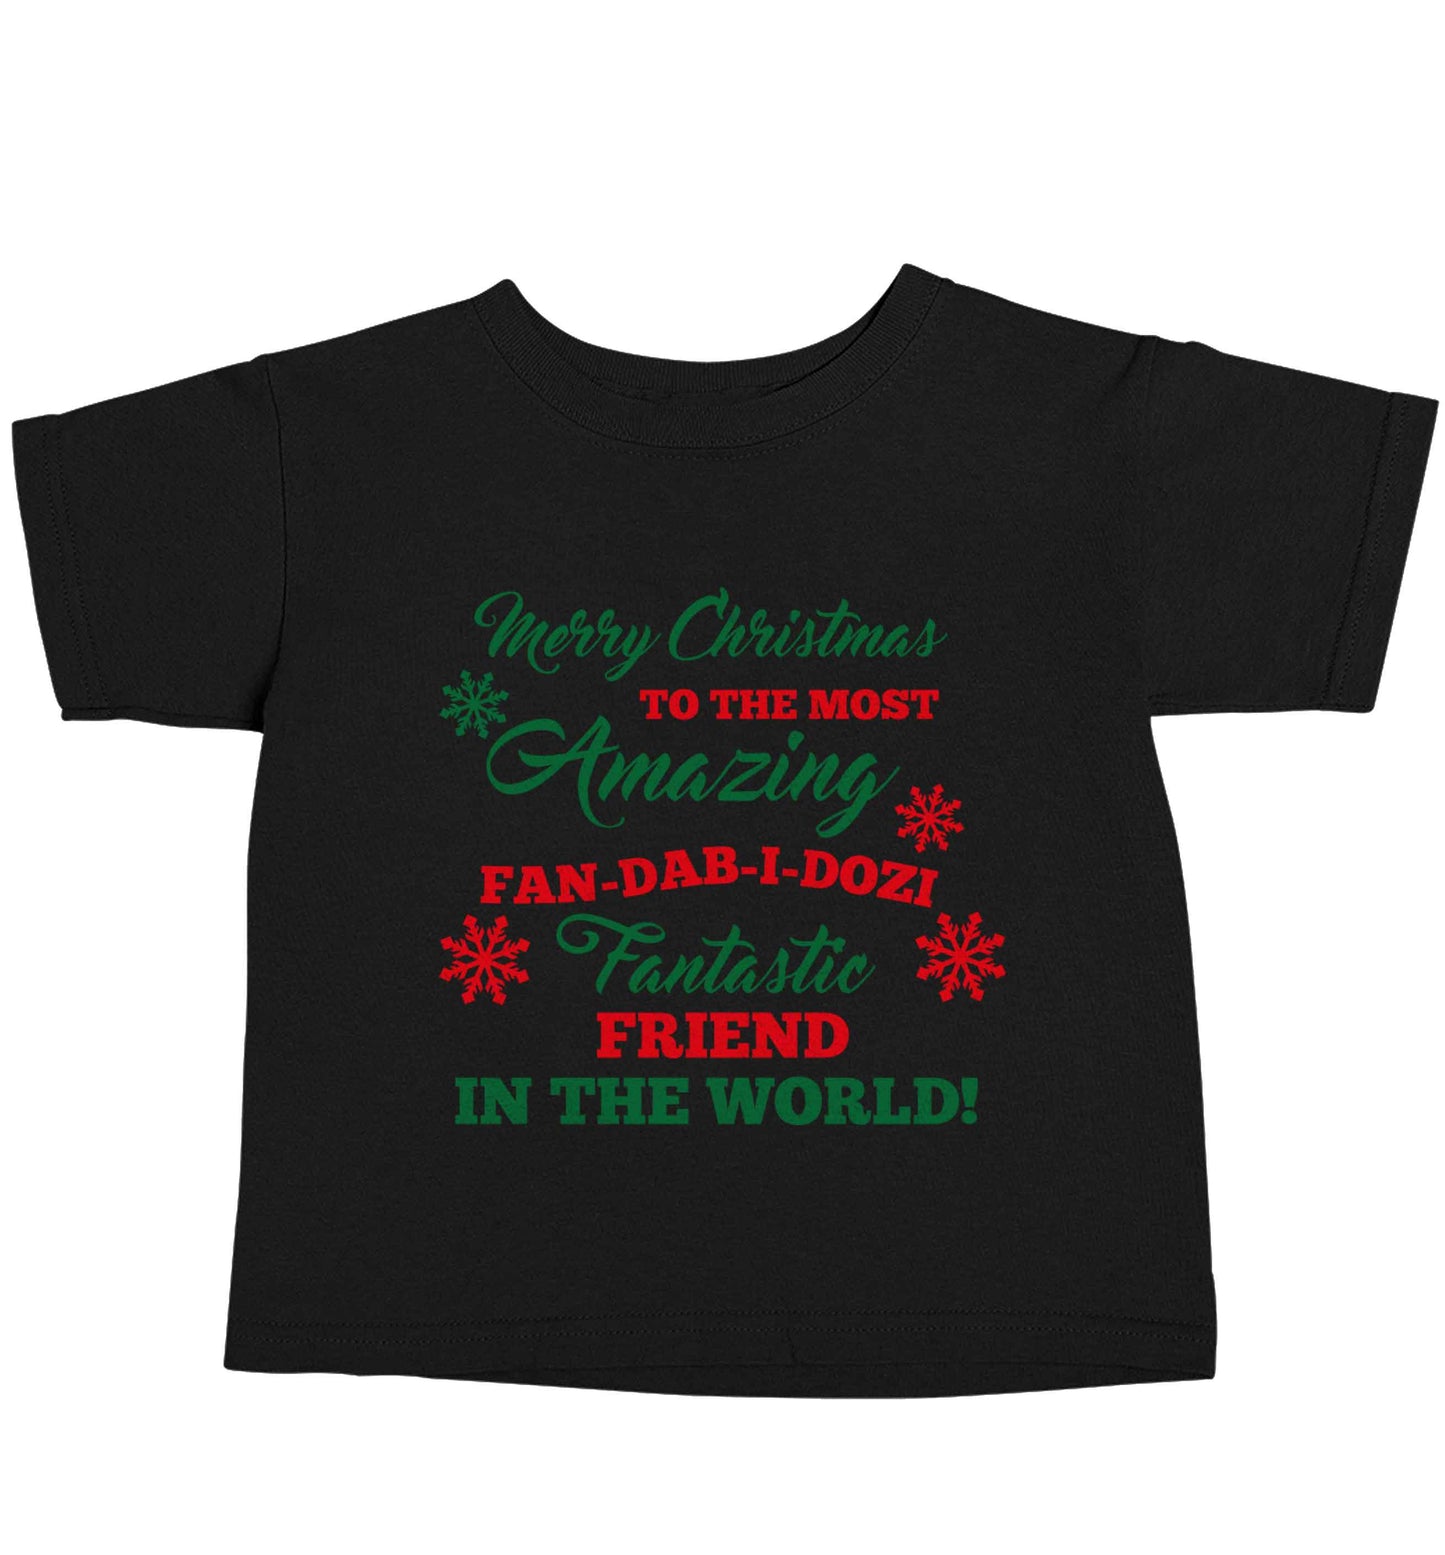 Merry Christmas to the most amazing fan-dab-i-dozi fantasic friend in the world Black baby toddler Tshirt 2 years